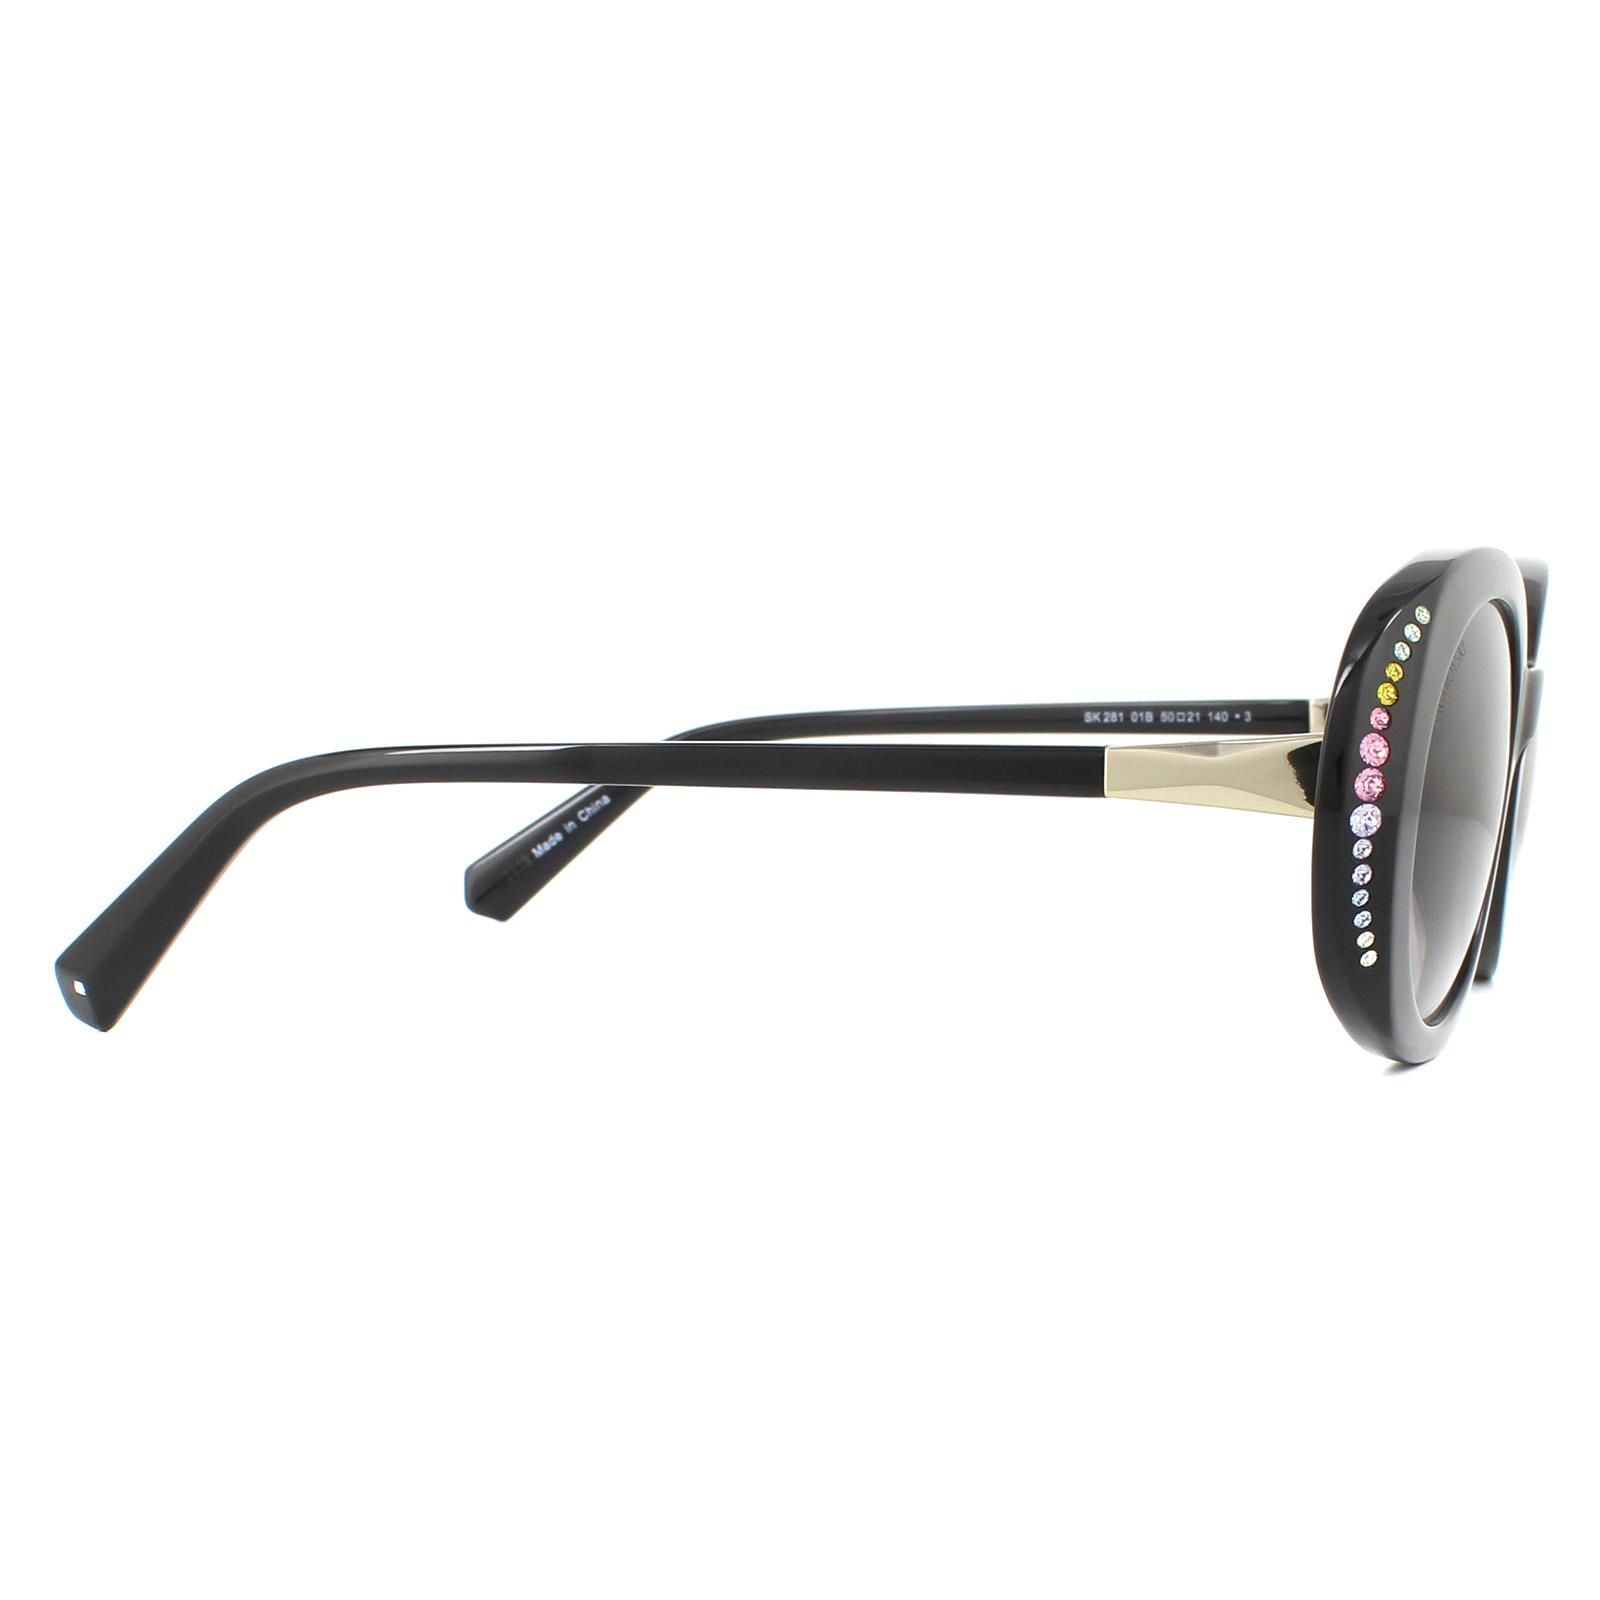 Swarovski Sunglasses SK0281/S 01B Black Smoke Grey Gradient are an elegant oval design crafted from lightweight acetate and embellished with Swarovski crystals on the outer edges of the frame with Swarovski logos engraved into the hinges.